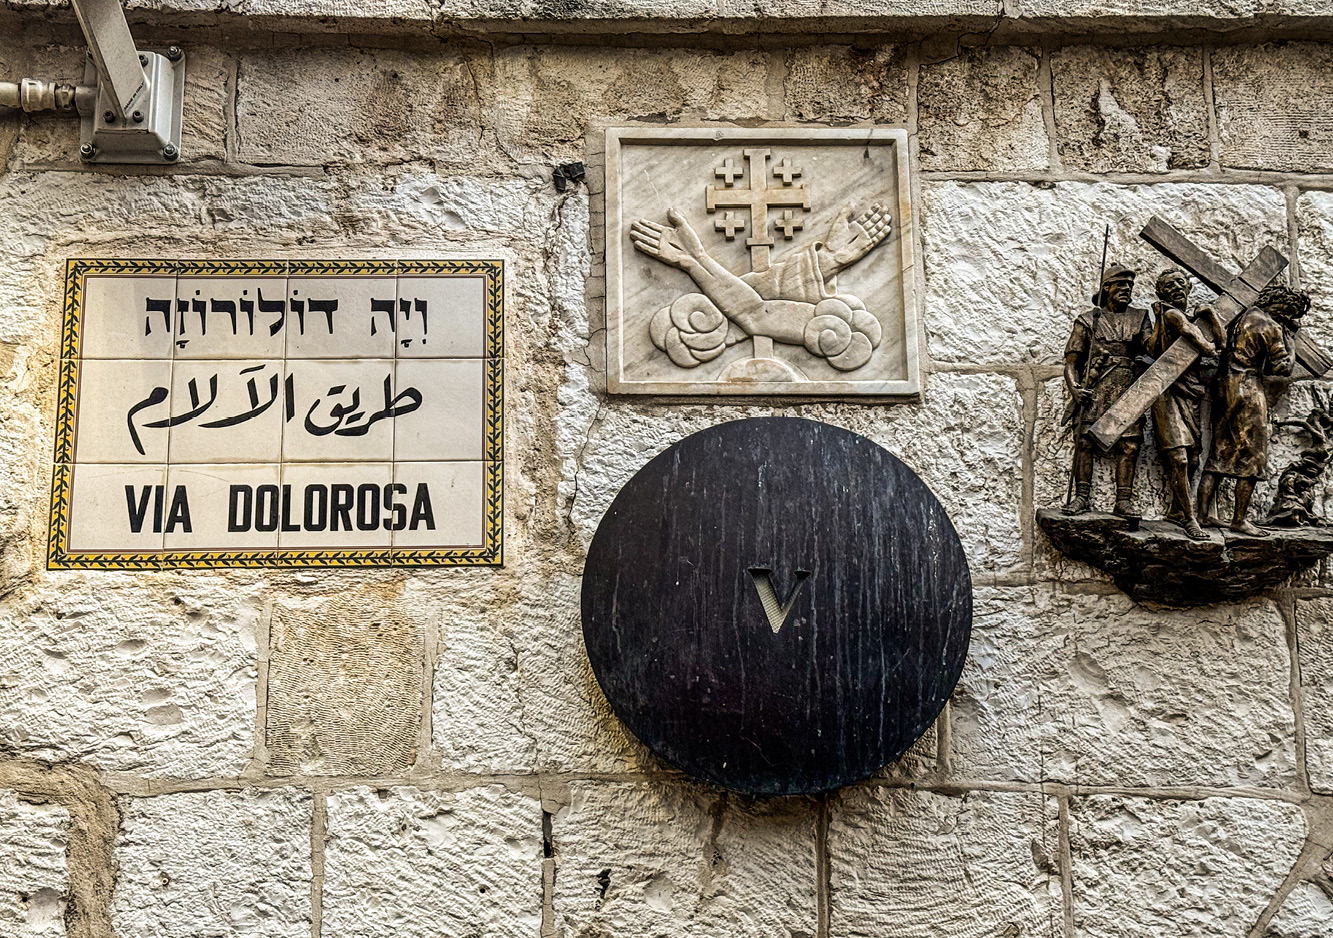 Roman soldiers forced Jesus to carry his cross along Via Dolorosa (Street of Sorrows); a plaque and a descriptive sculpture mark the thirteen Stations of the Cross.